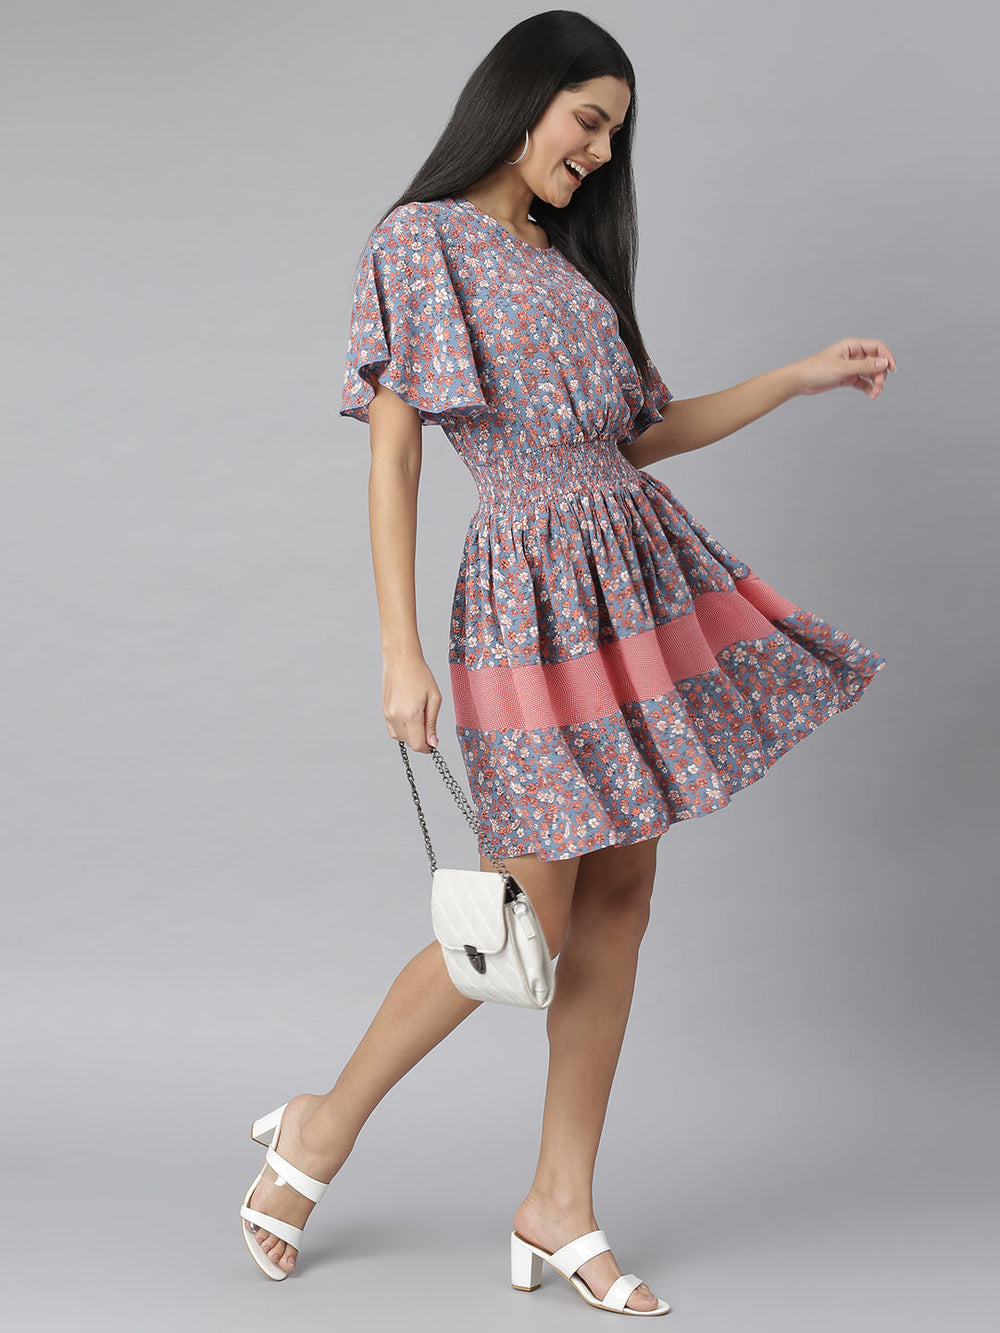 Grey-&-Red-Floral-Printed-Fit-And-Flare-Dress